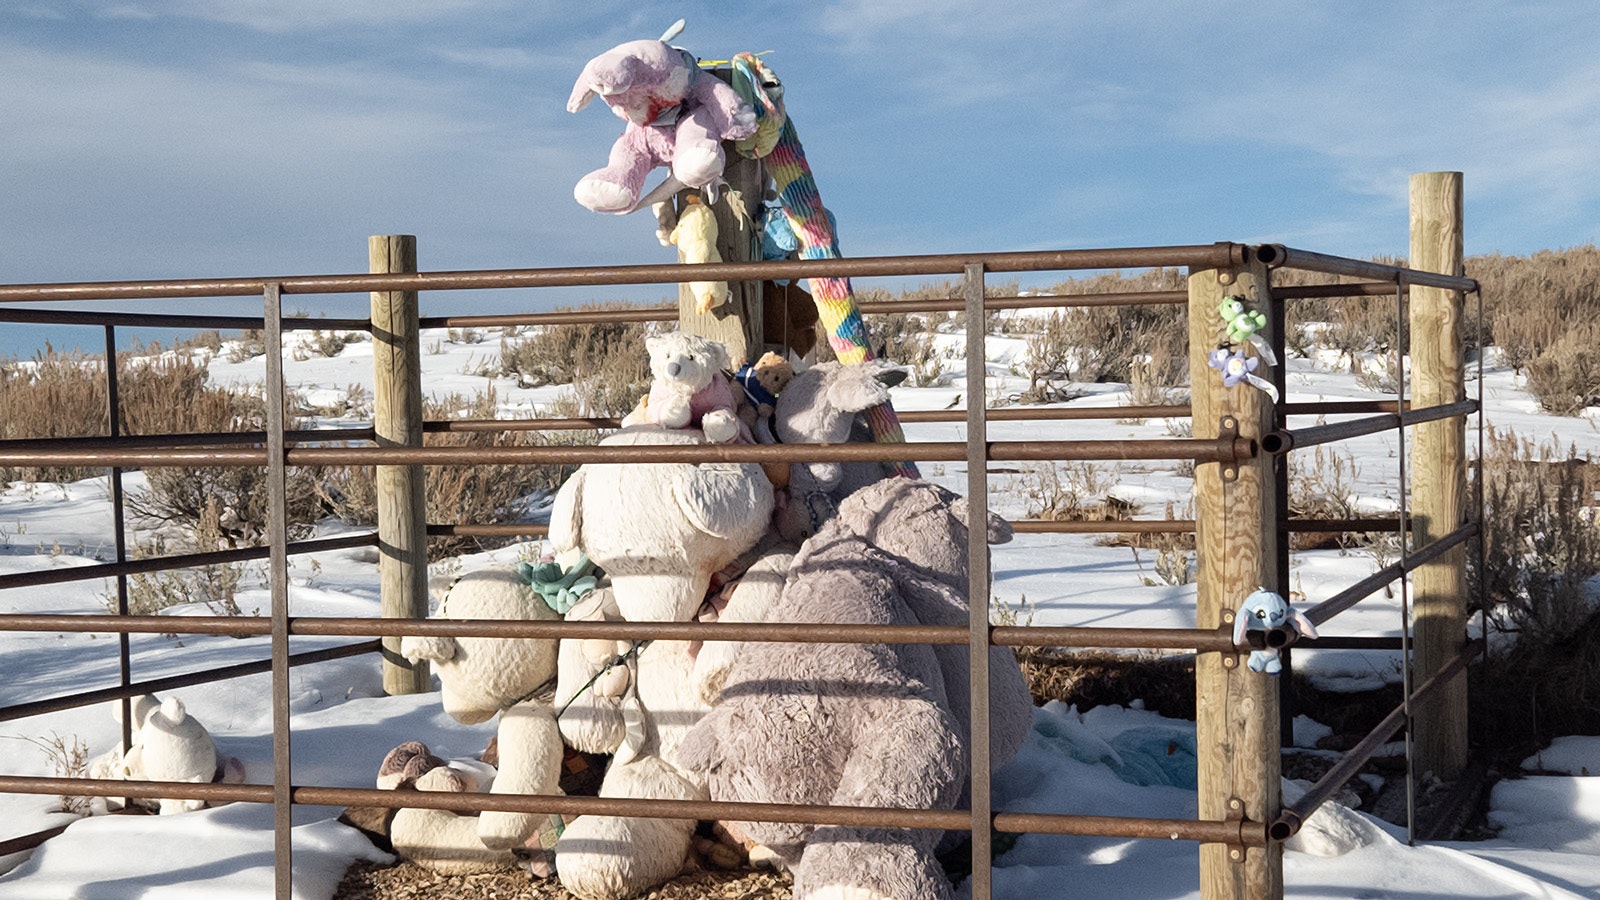 A recent group of local volunteers built a fence around Teddy Bear Corner and replaced its post, preserving the spot for another century.